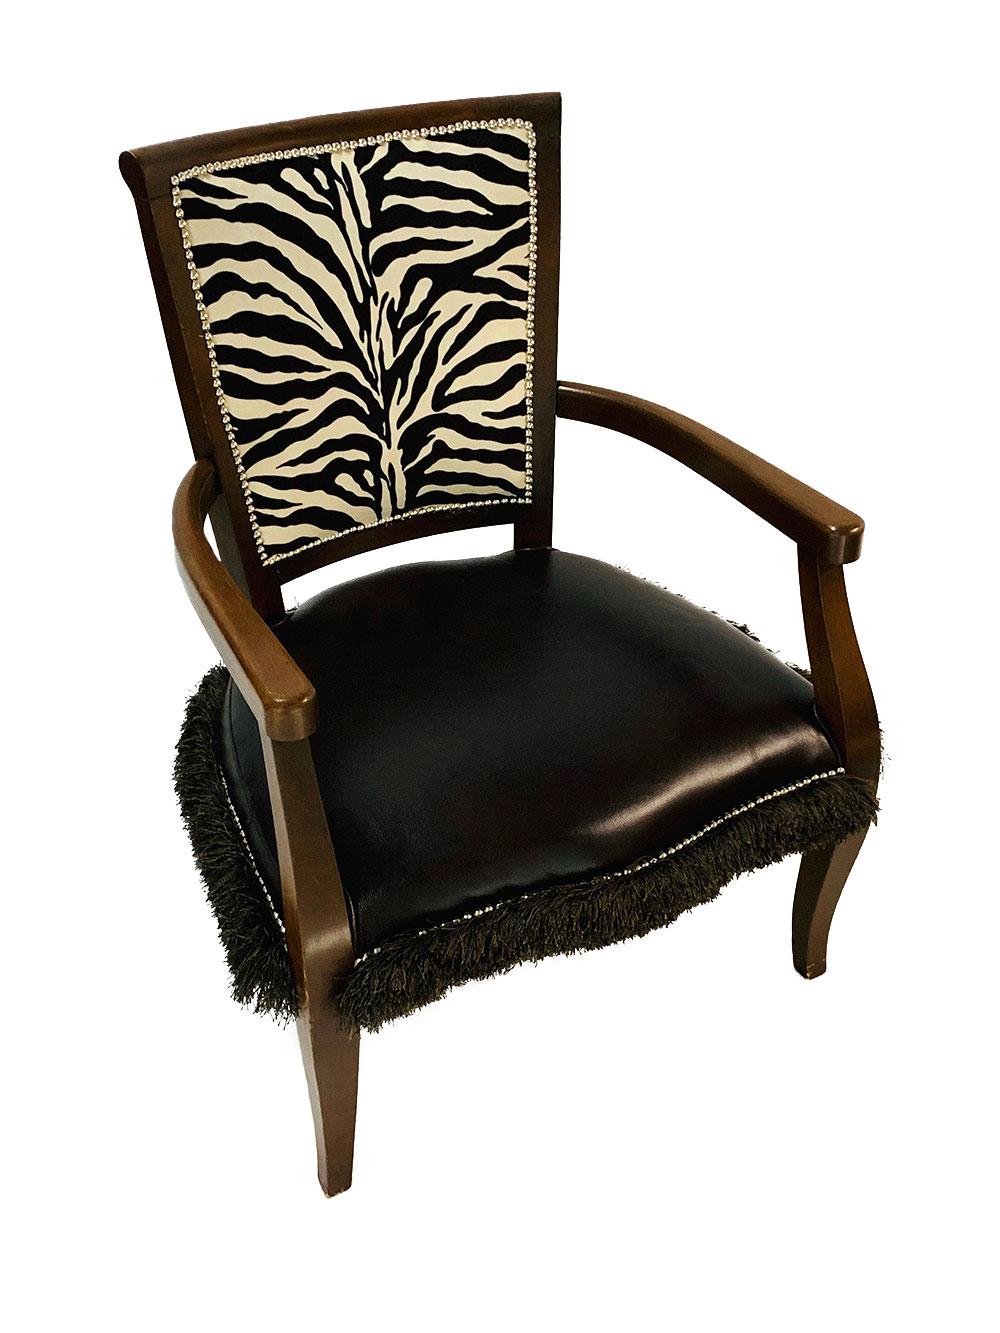 Vintage 20th century late, modern French style open armchair fully restored and reupholstered in brown and white zebra velour on the back and a seat covered in dark brown branded leather. Contemporary silver nailheads and brown brush fringe outline